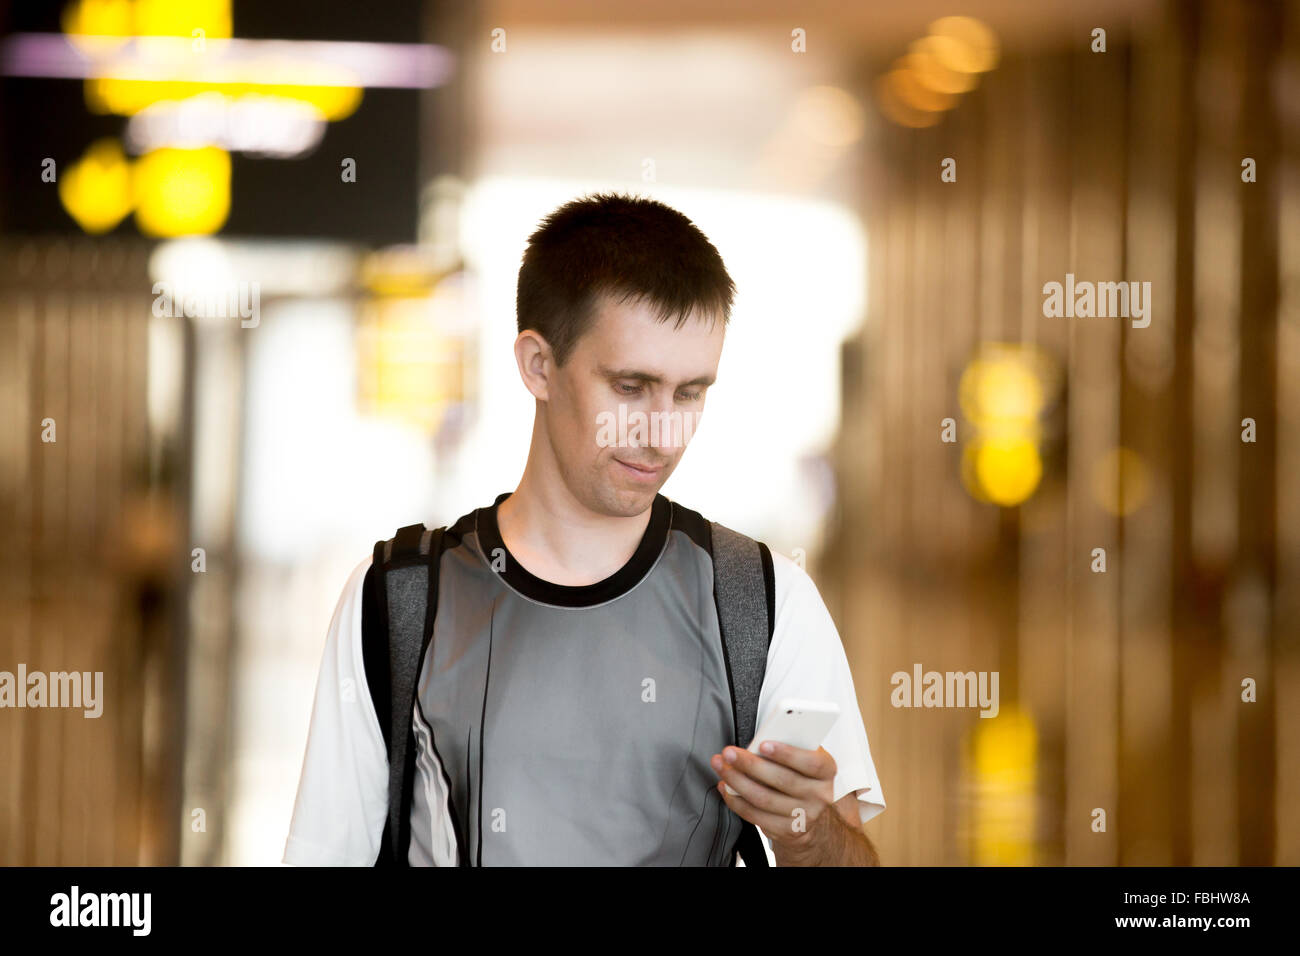 Smiling young man with backpack in his 20s walking in modern building, holding smartphone, looking at screen, using cell phone a Stock Photo